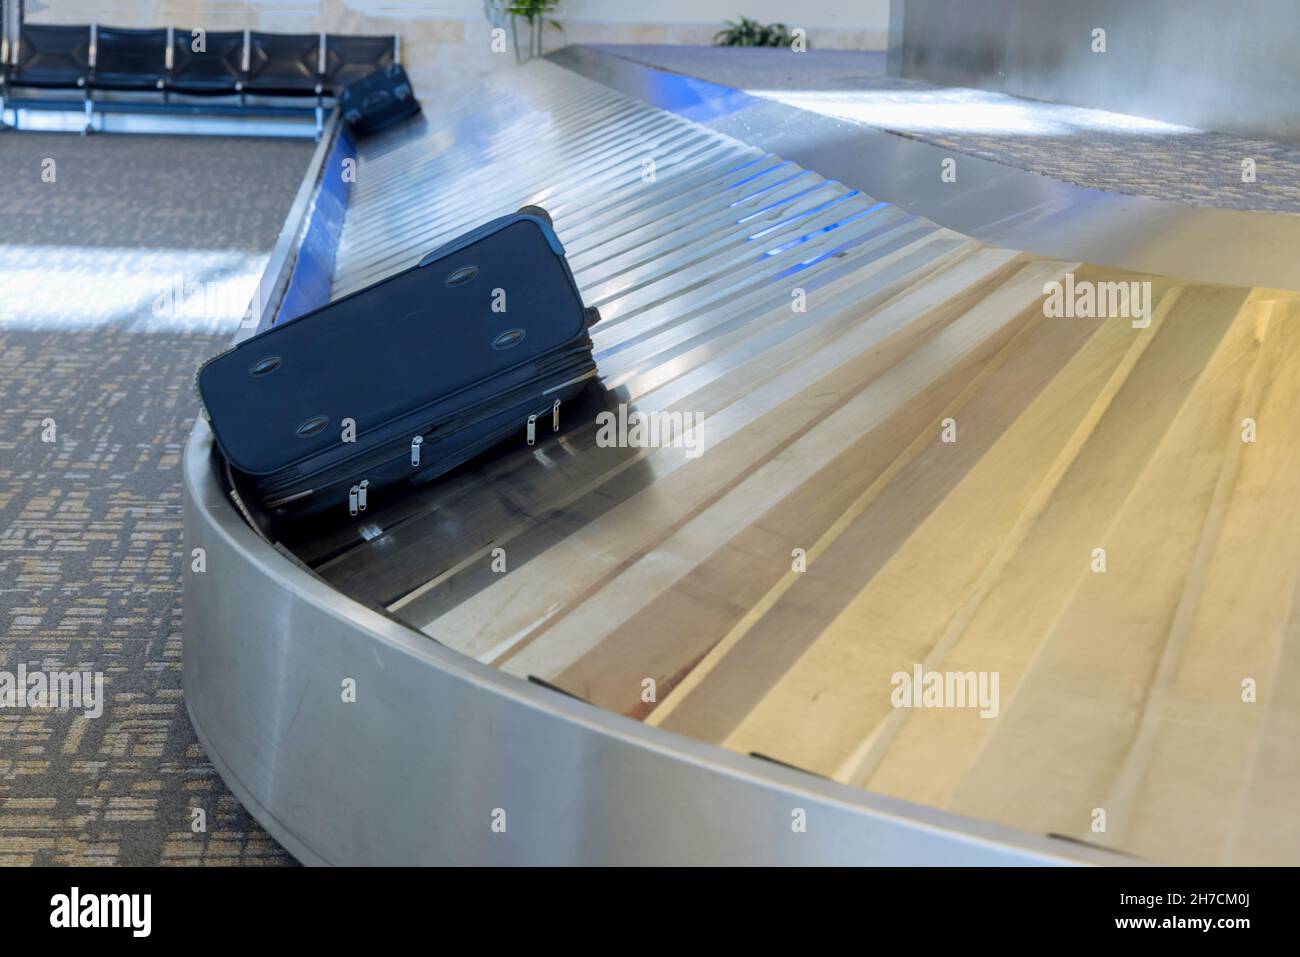 Carousel with luggage at arrival area of passenger terminal Stock Photo